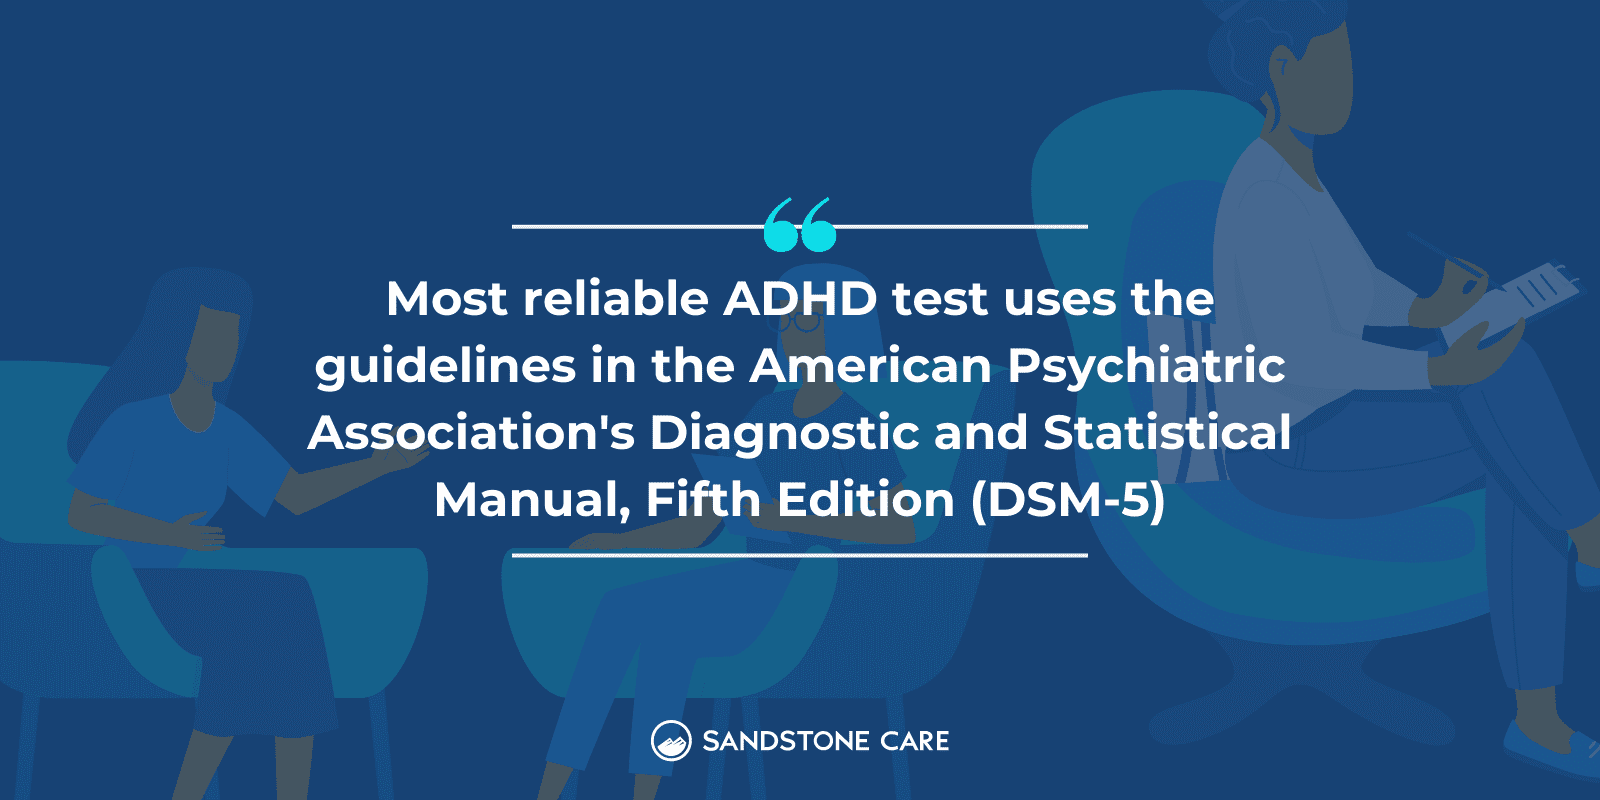 Most Reliable ADHD Tests based on DSM-5 explained on top of a background image with digital illustrations of therapists diagnosing ADHD